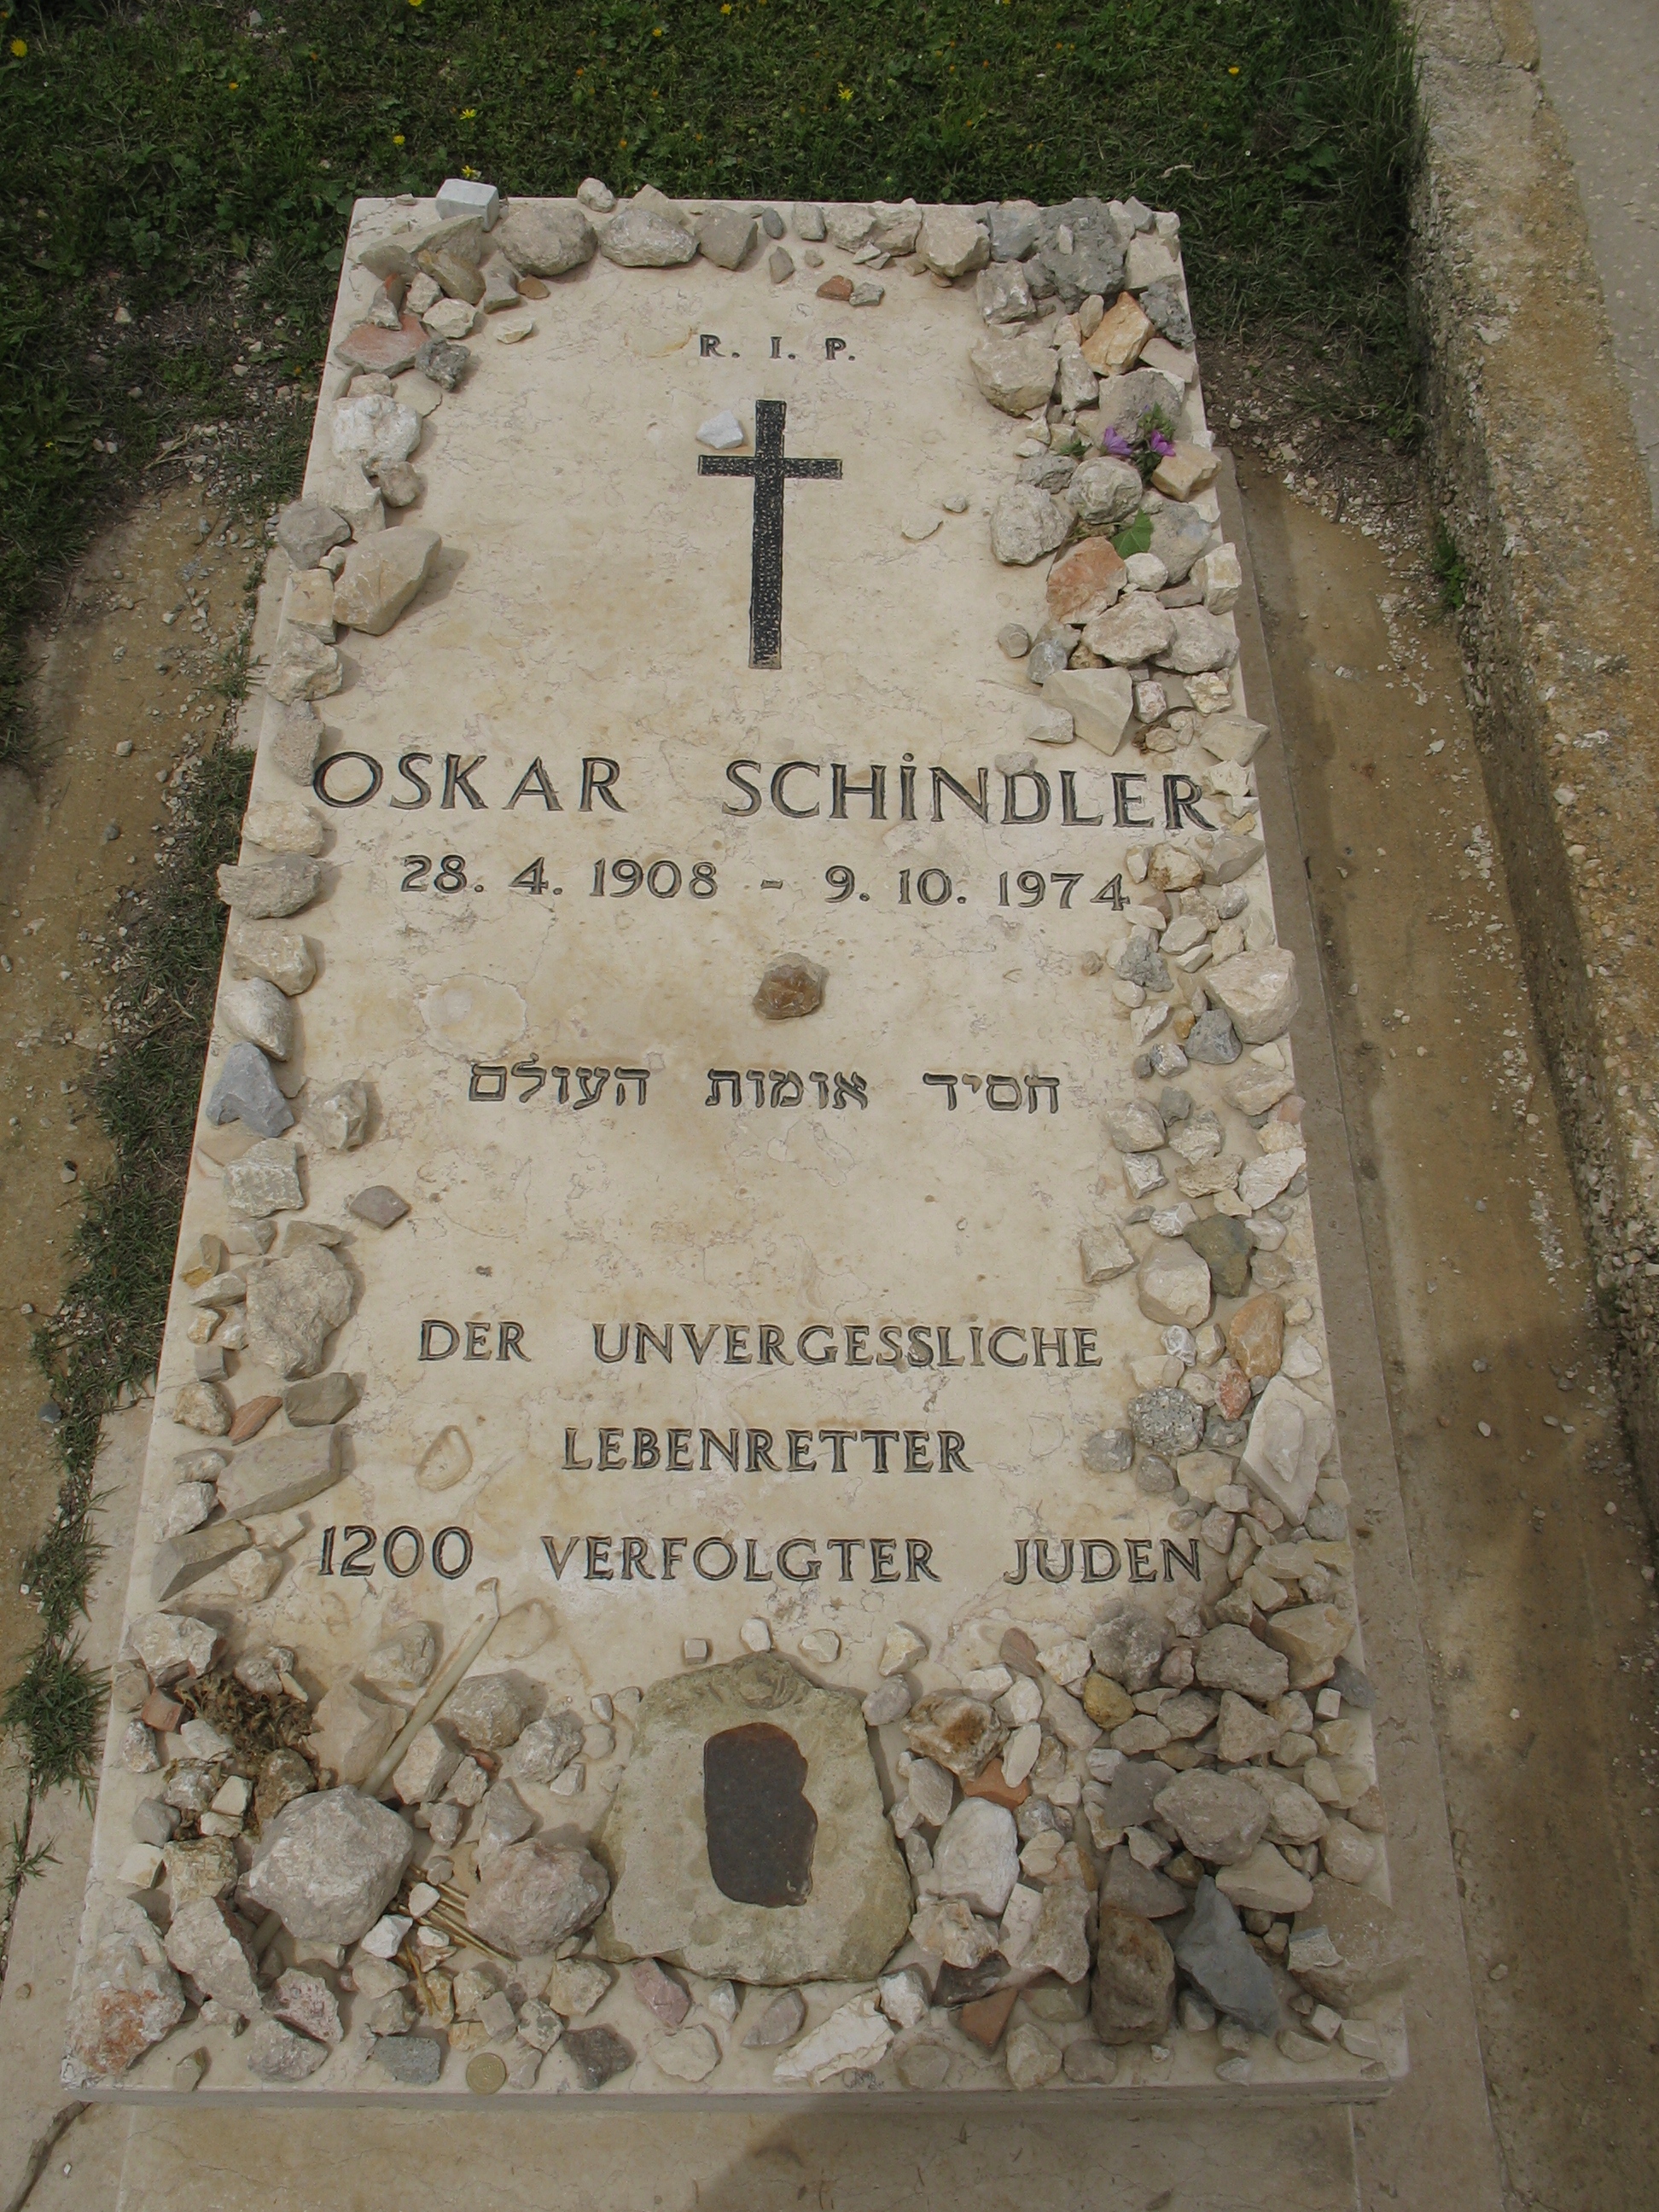 Oskar Schindler's grave at the Catholic cemetery at Mount Zion in Jerusalem, Israel, Acmthompson at en.wikipedia, Public domain, via Wikimedia Commons